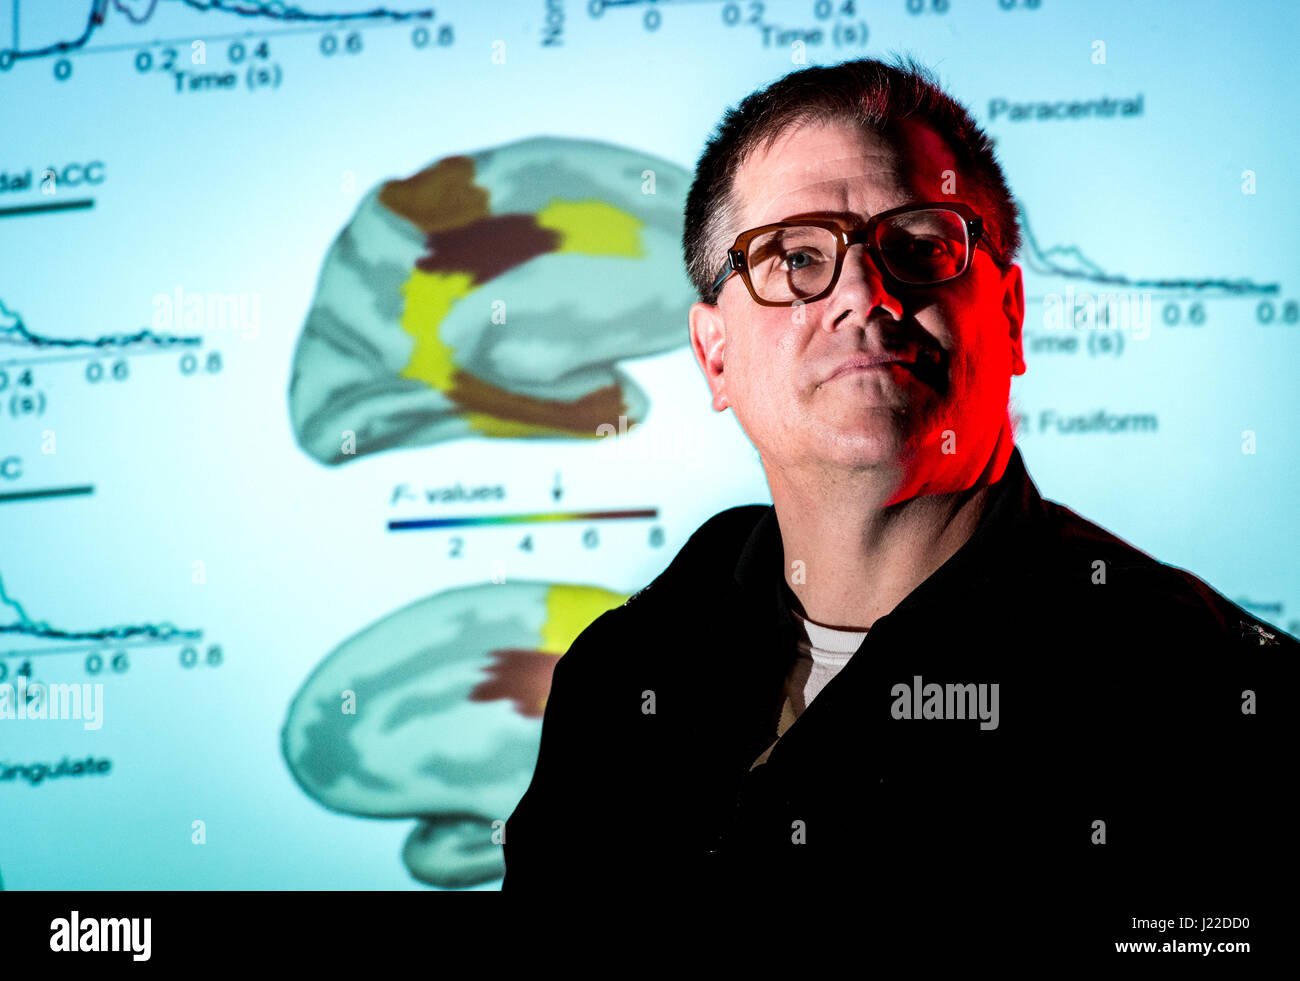 Navy Cmdr. John Hughes, director of the Magnetoencephalography (MEG) Laboratory at the National Intrepid Center of Excellence (NICoE) at Walter Reed National Military Medical Center in Bethesda, Md., stands before an image of magnetic fields generated by the brain, March 16, 2017. Unlike its cousin, the more commonly used electroencephalography (EEG), the MEG brain scan can see changes in structures that reside deep in the brain tissue. By measuring minute changes in magnetic fields generated by the cerebral cortex while resting, while thinking and while engaged in some particular task, defici Stock Photo